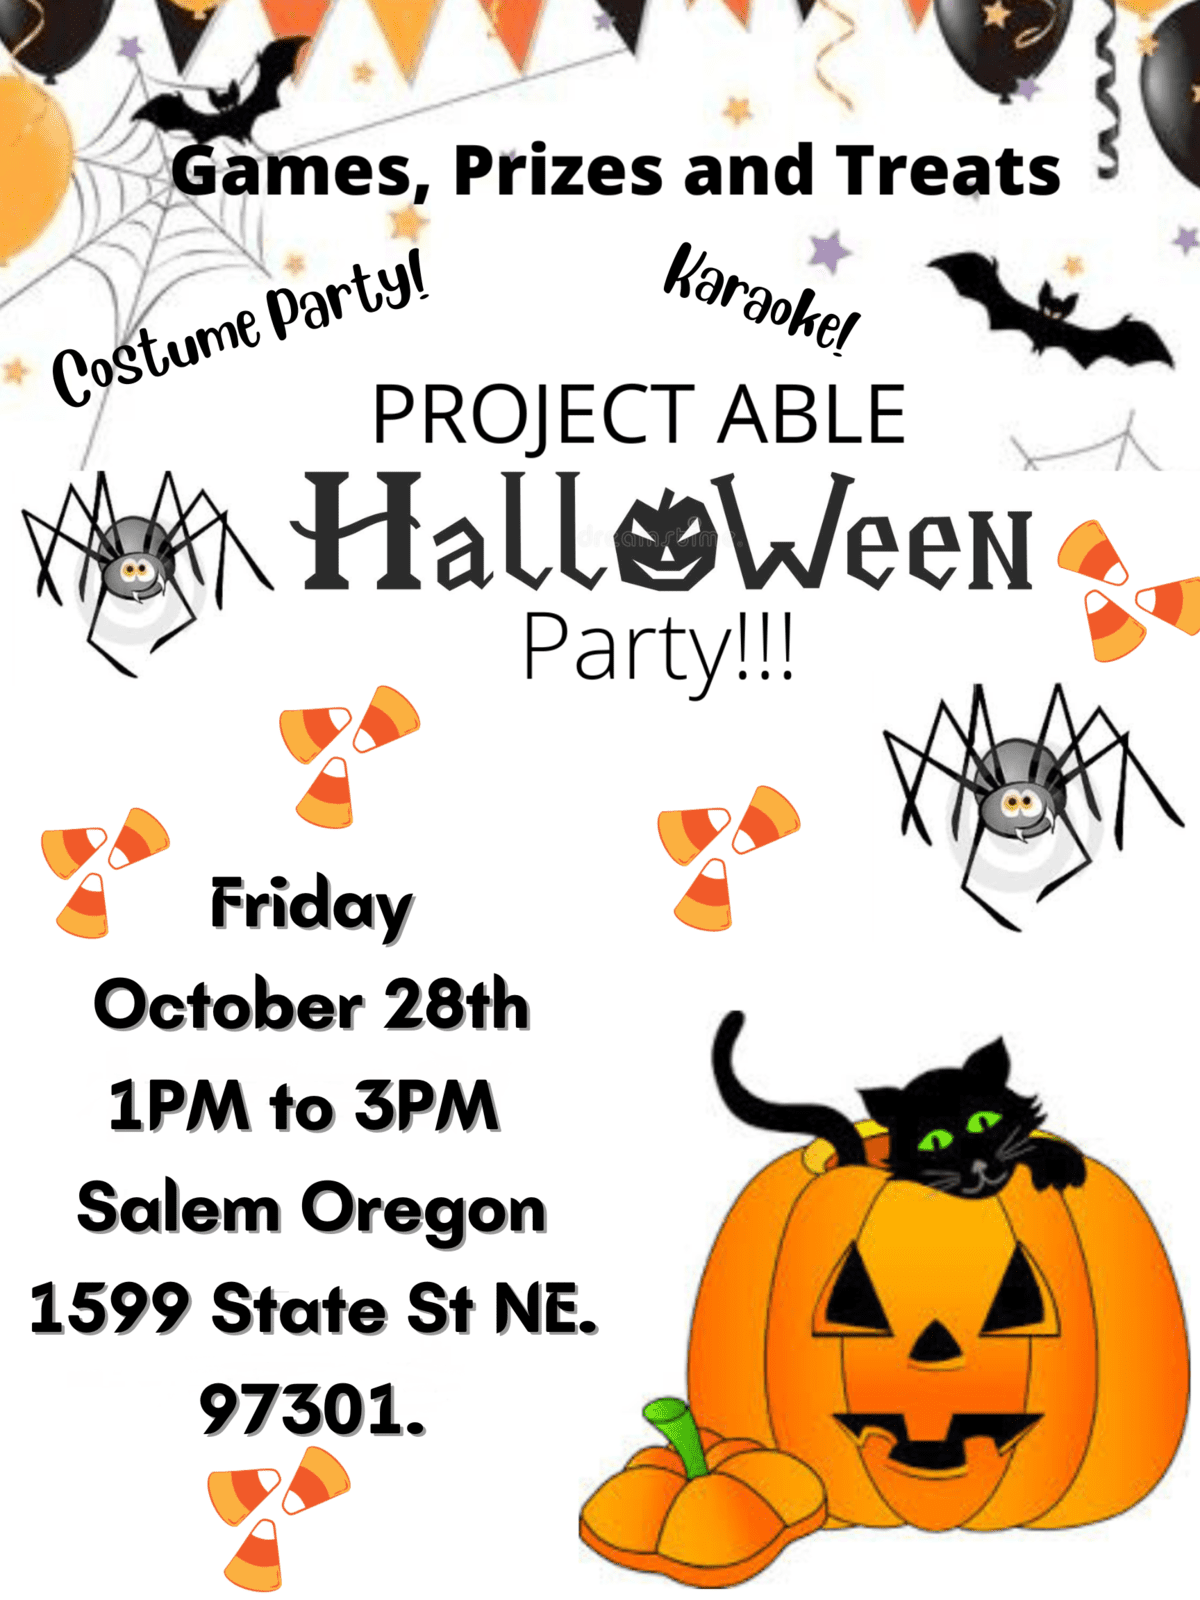 Project ABLE Halloween Party 2022